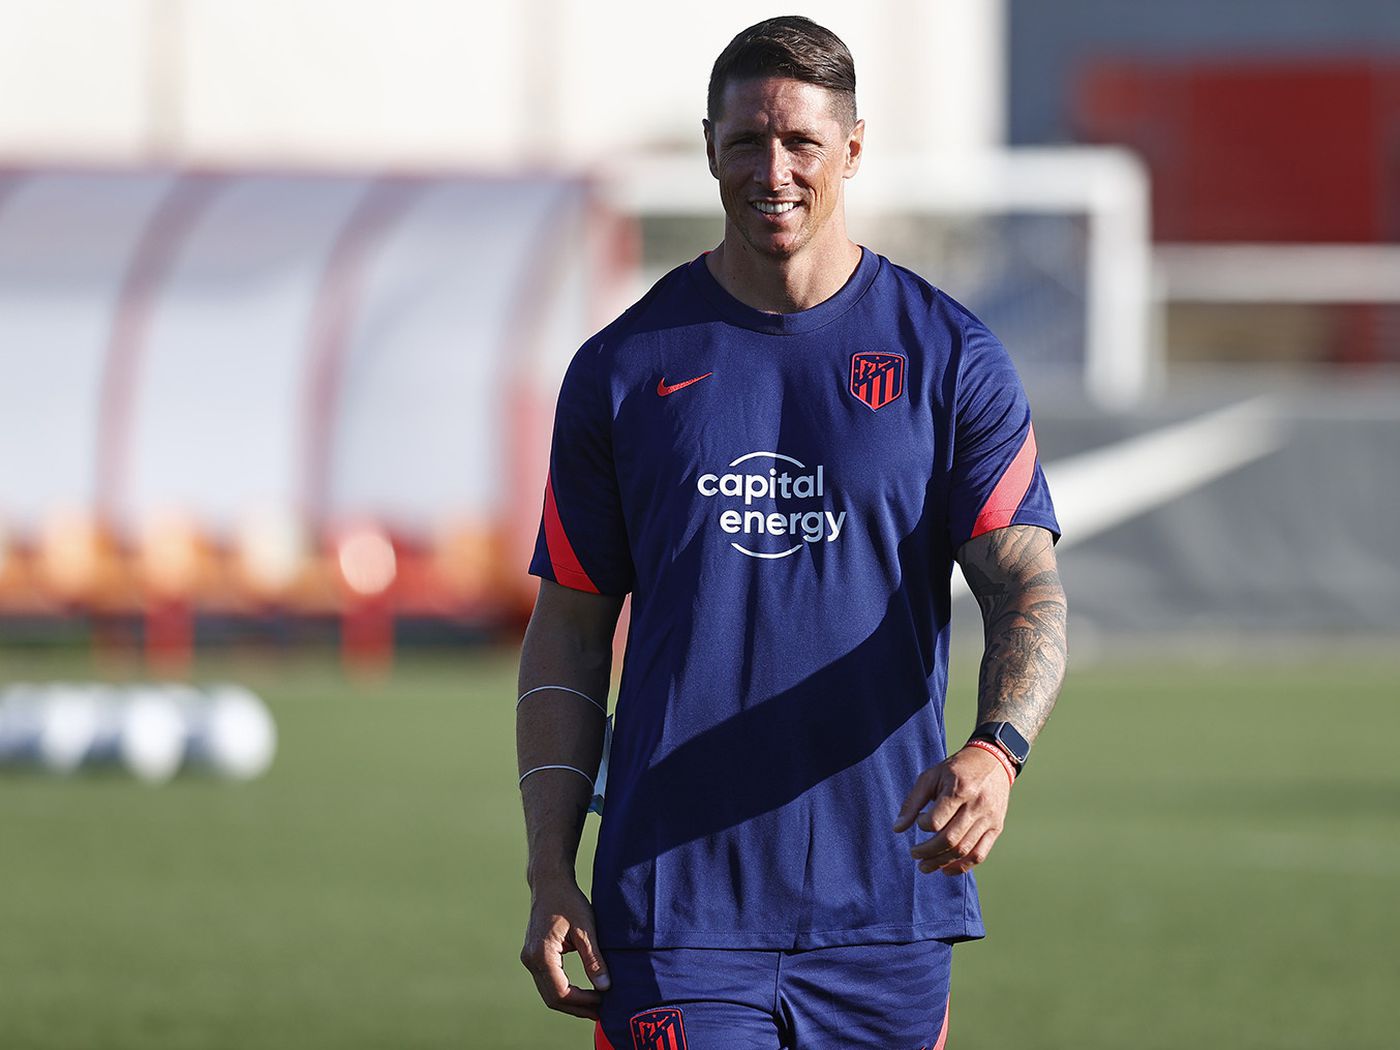 Fernando Torres begins coaching career with Atlético youth side - Into the Calderon